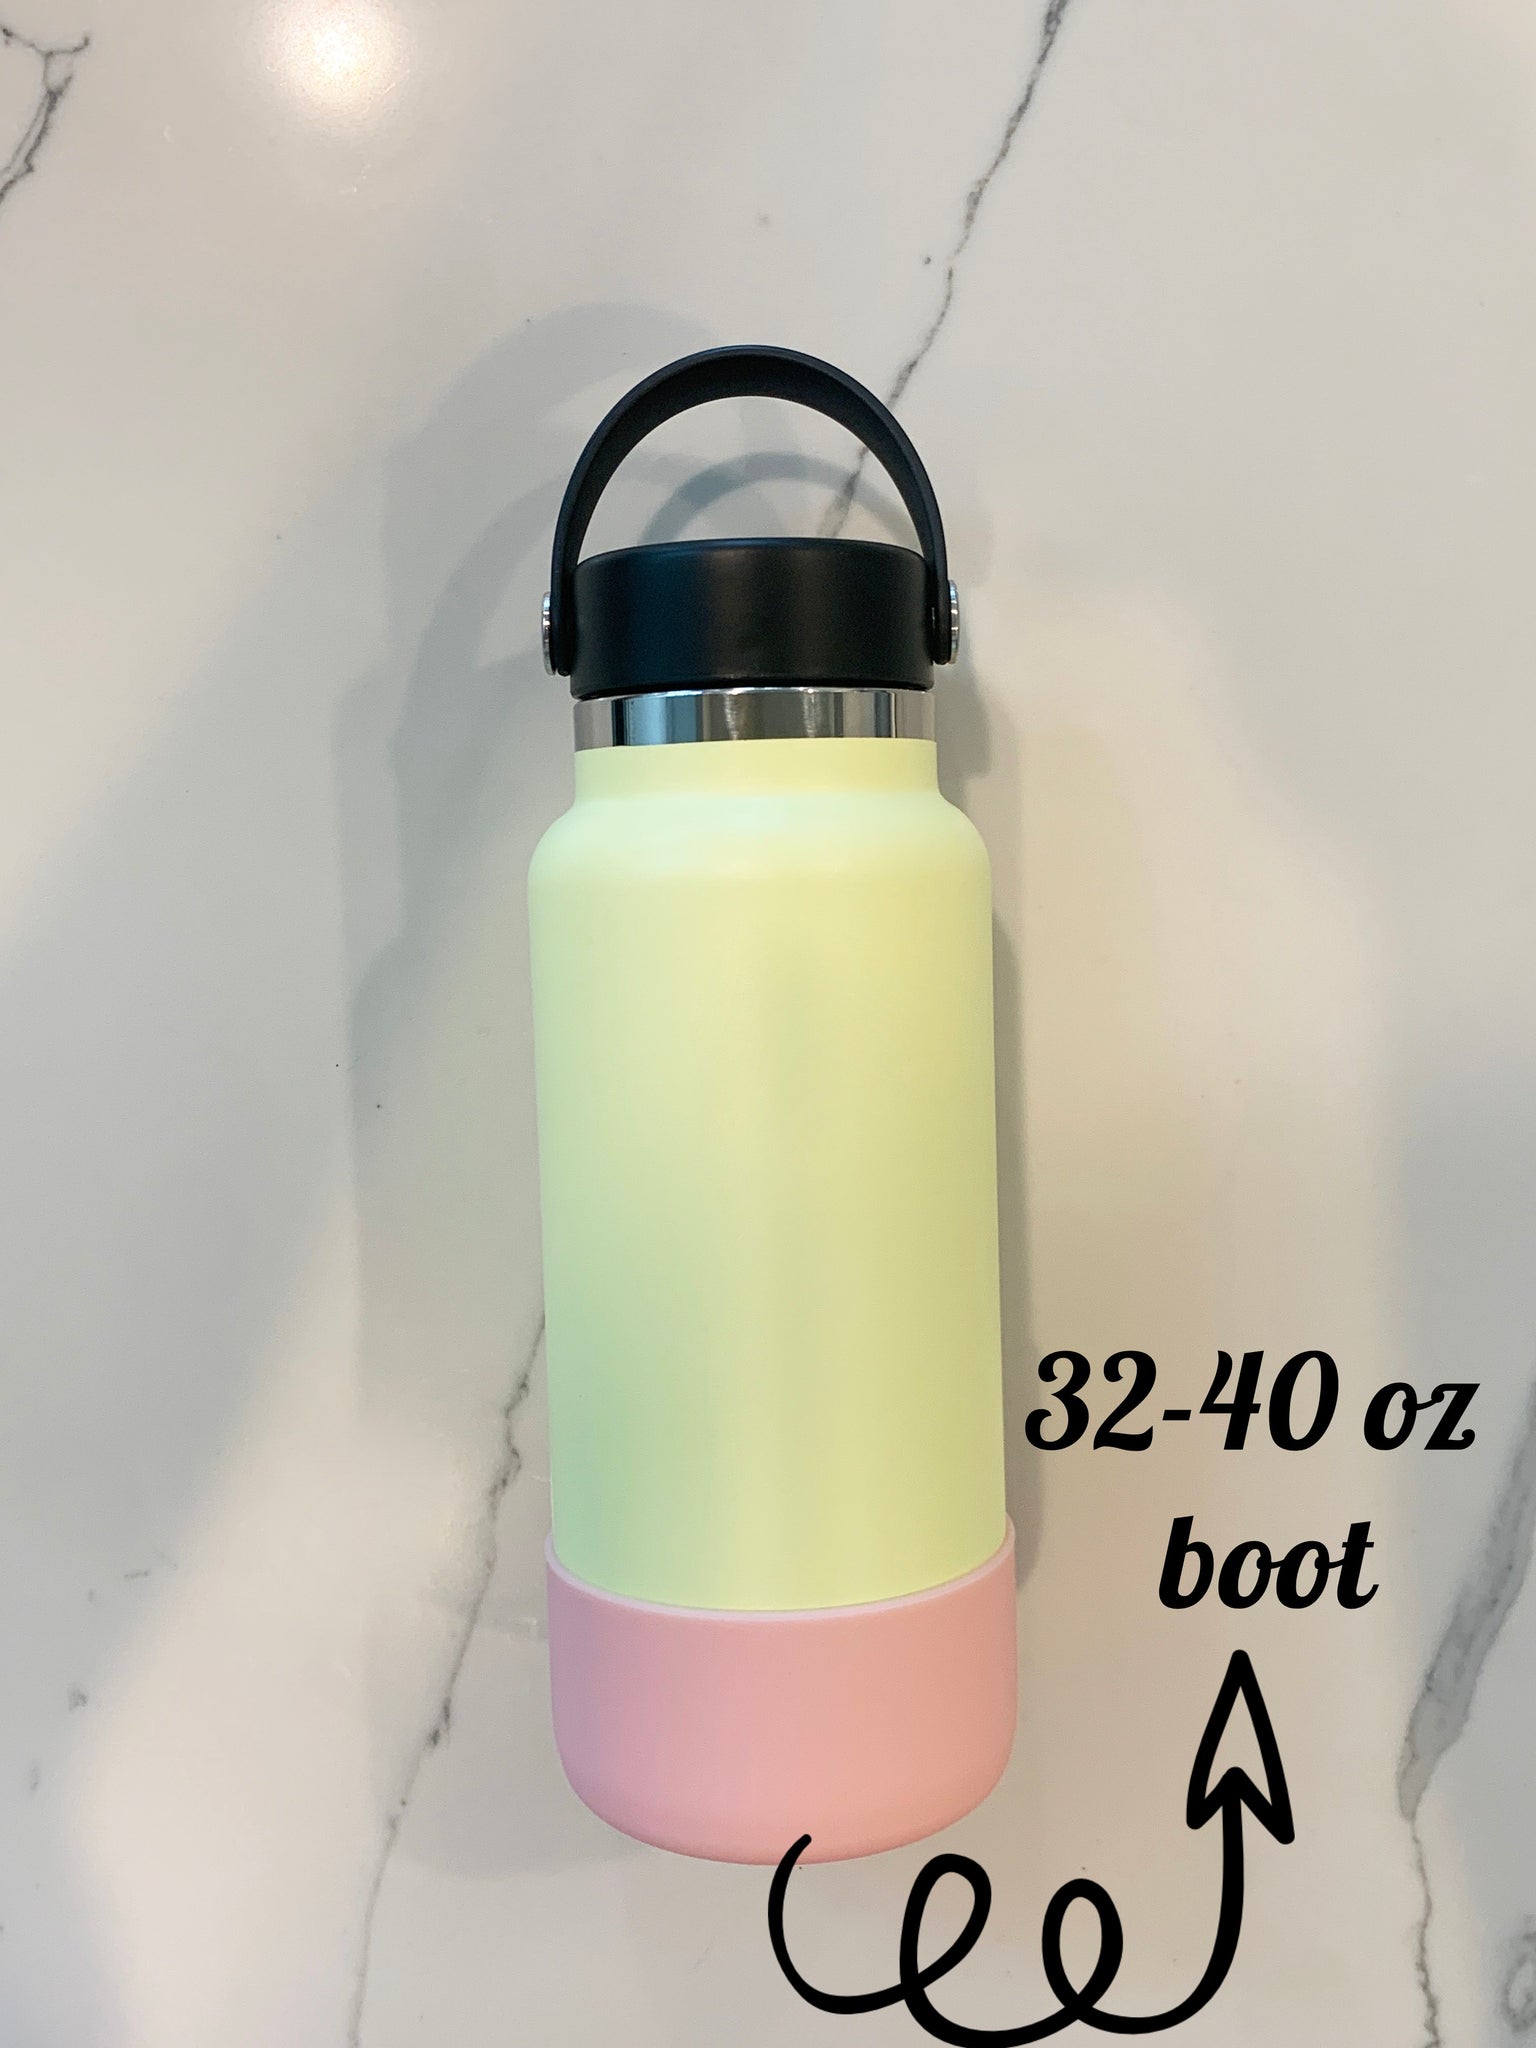 Protective Silicone Boot Cover Compatible with Hydro Flask